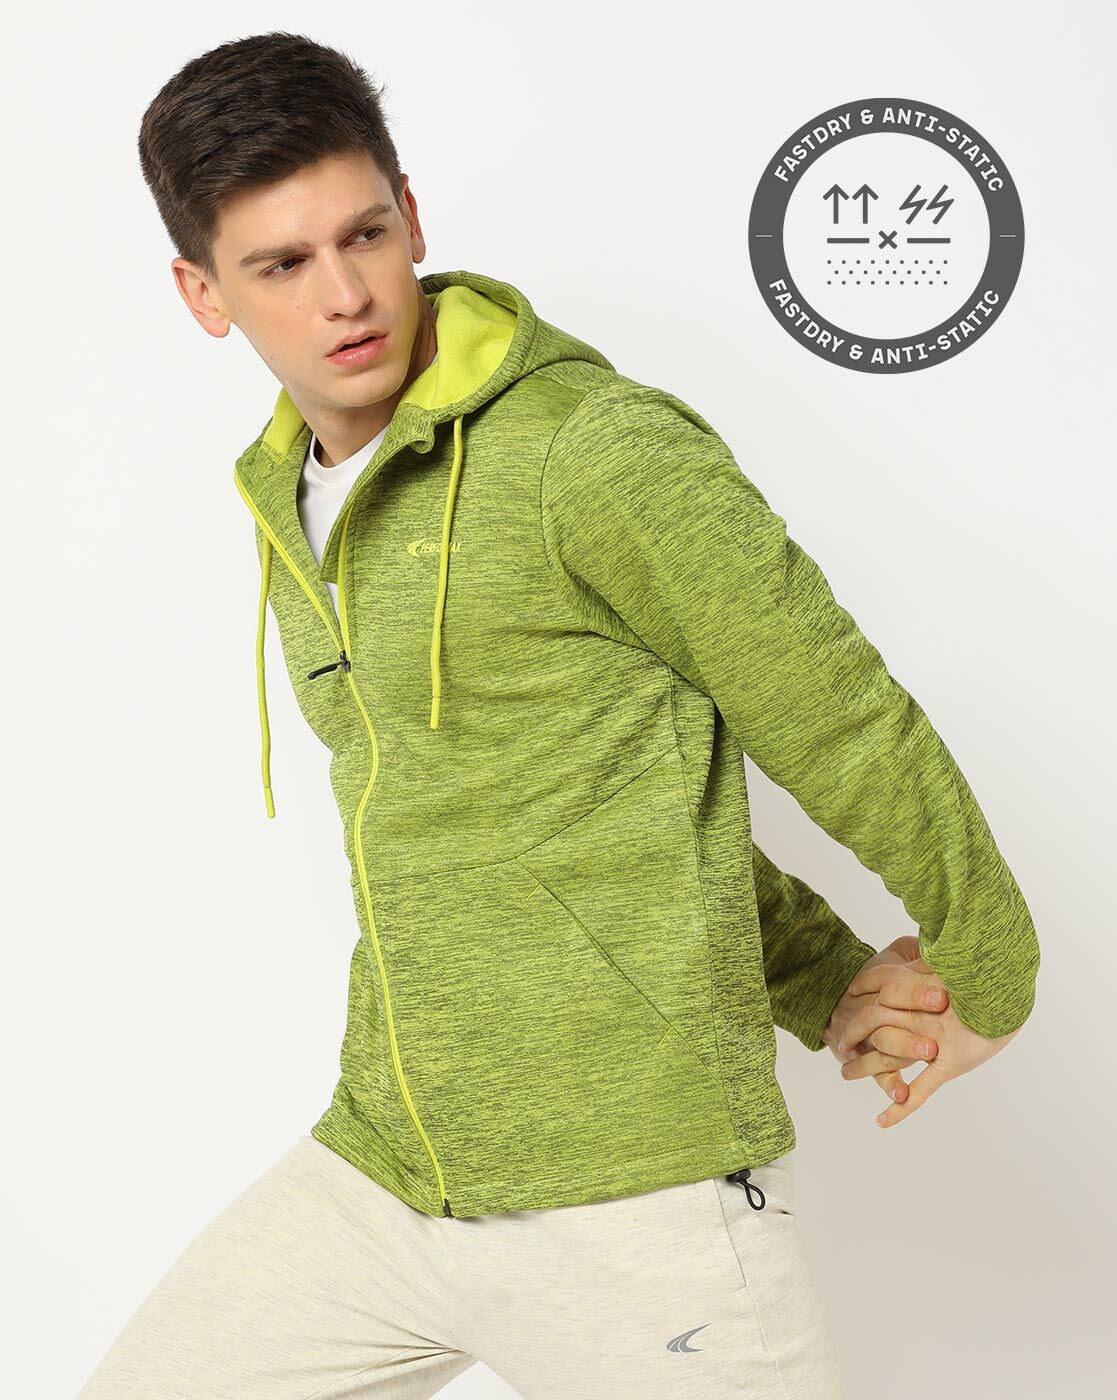  HABIT Men's Hooded Performance Layer, Deep Lichen Green,  X-Large : Clothing, Shoes & Jewelry